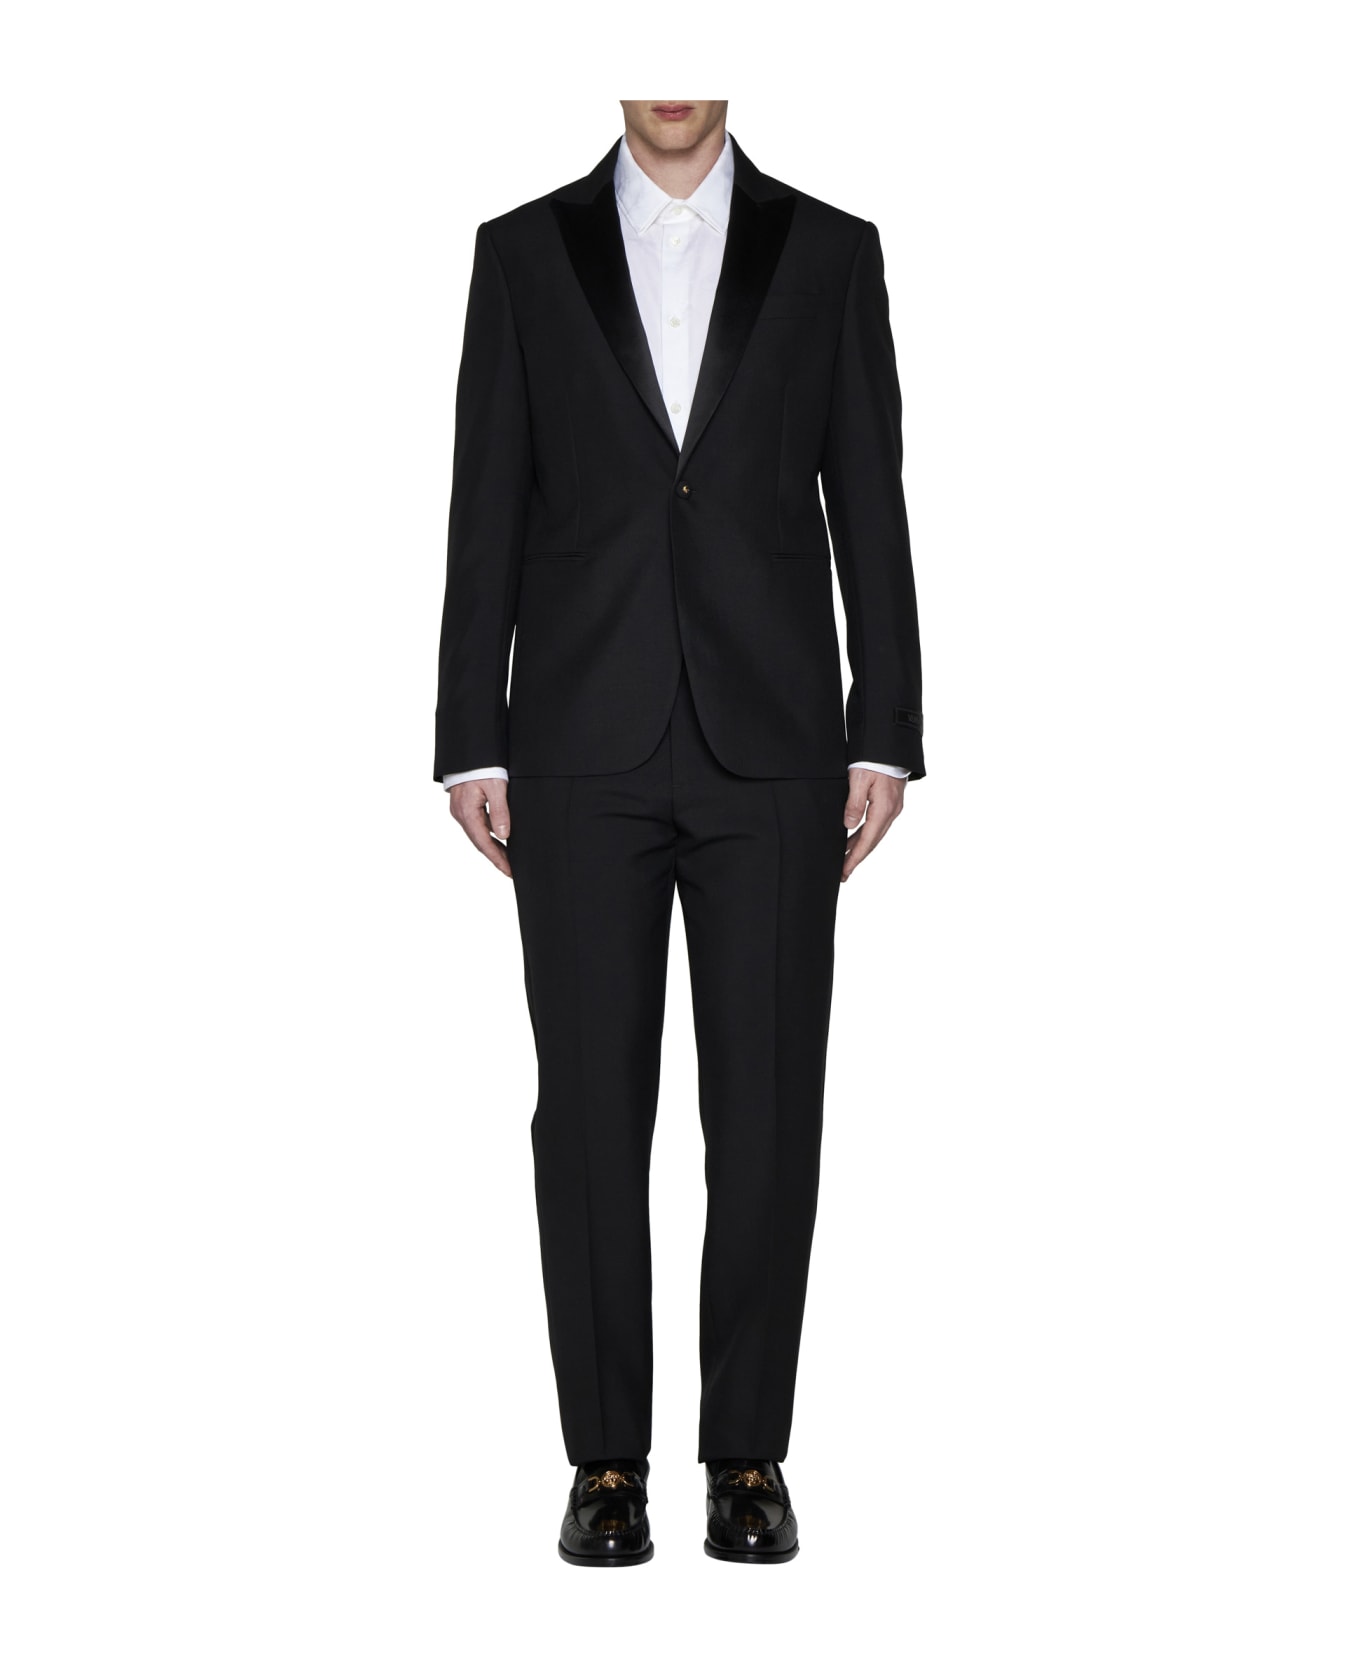 Versace trousers grigio With Silk Details - Black